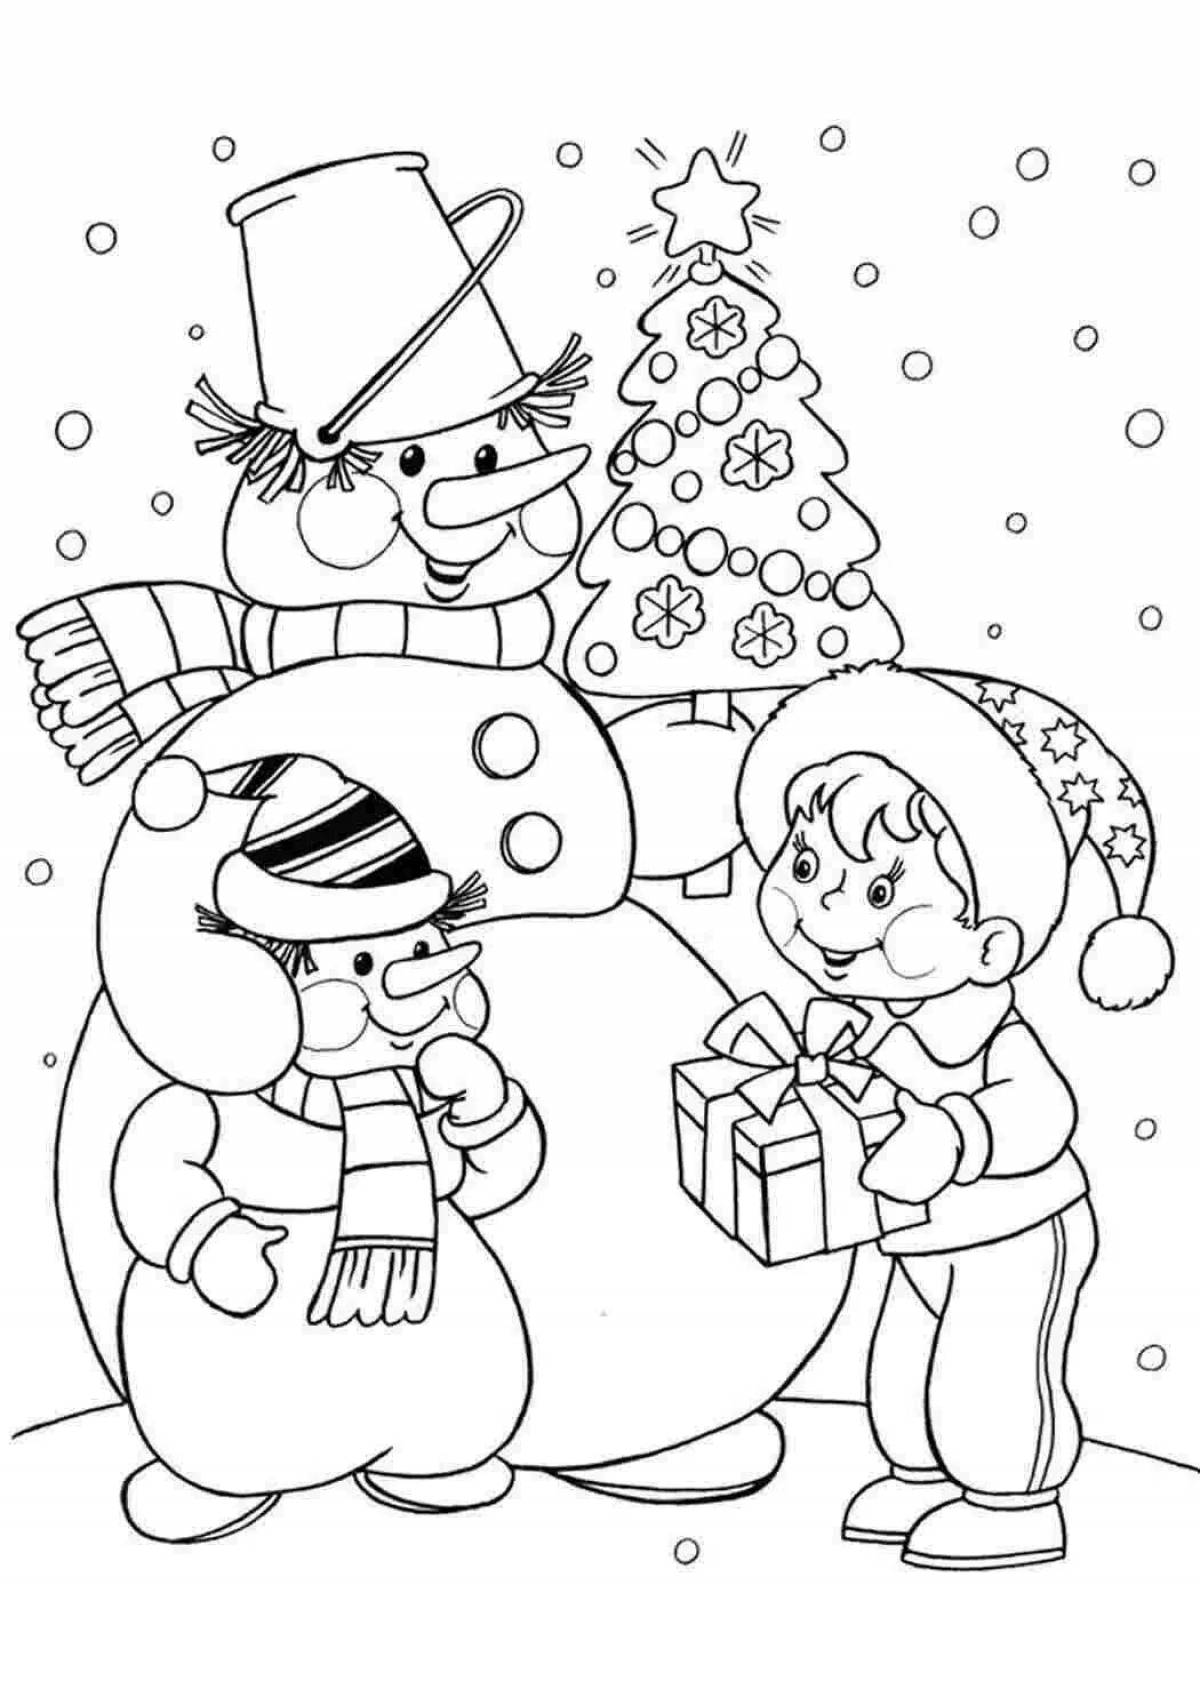 Coloring bright tree and snowman